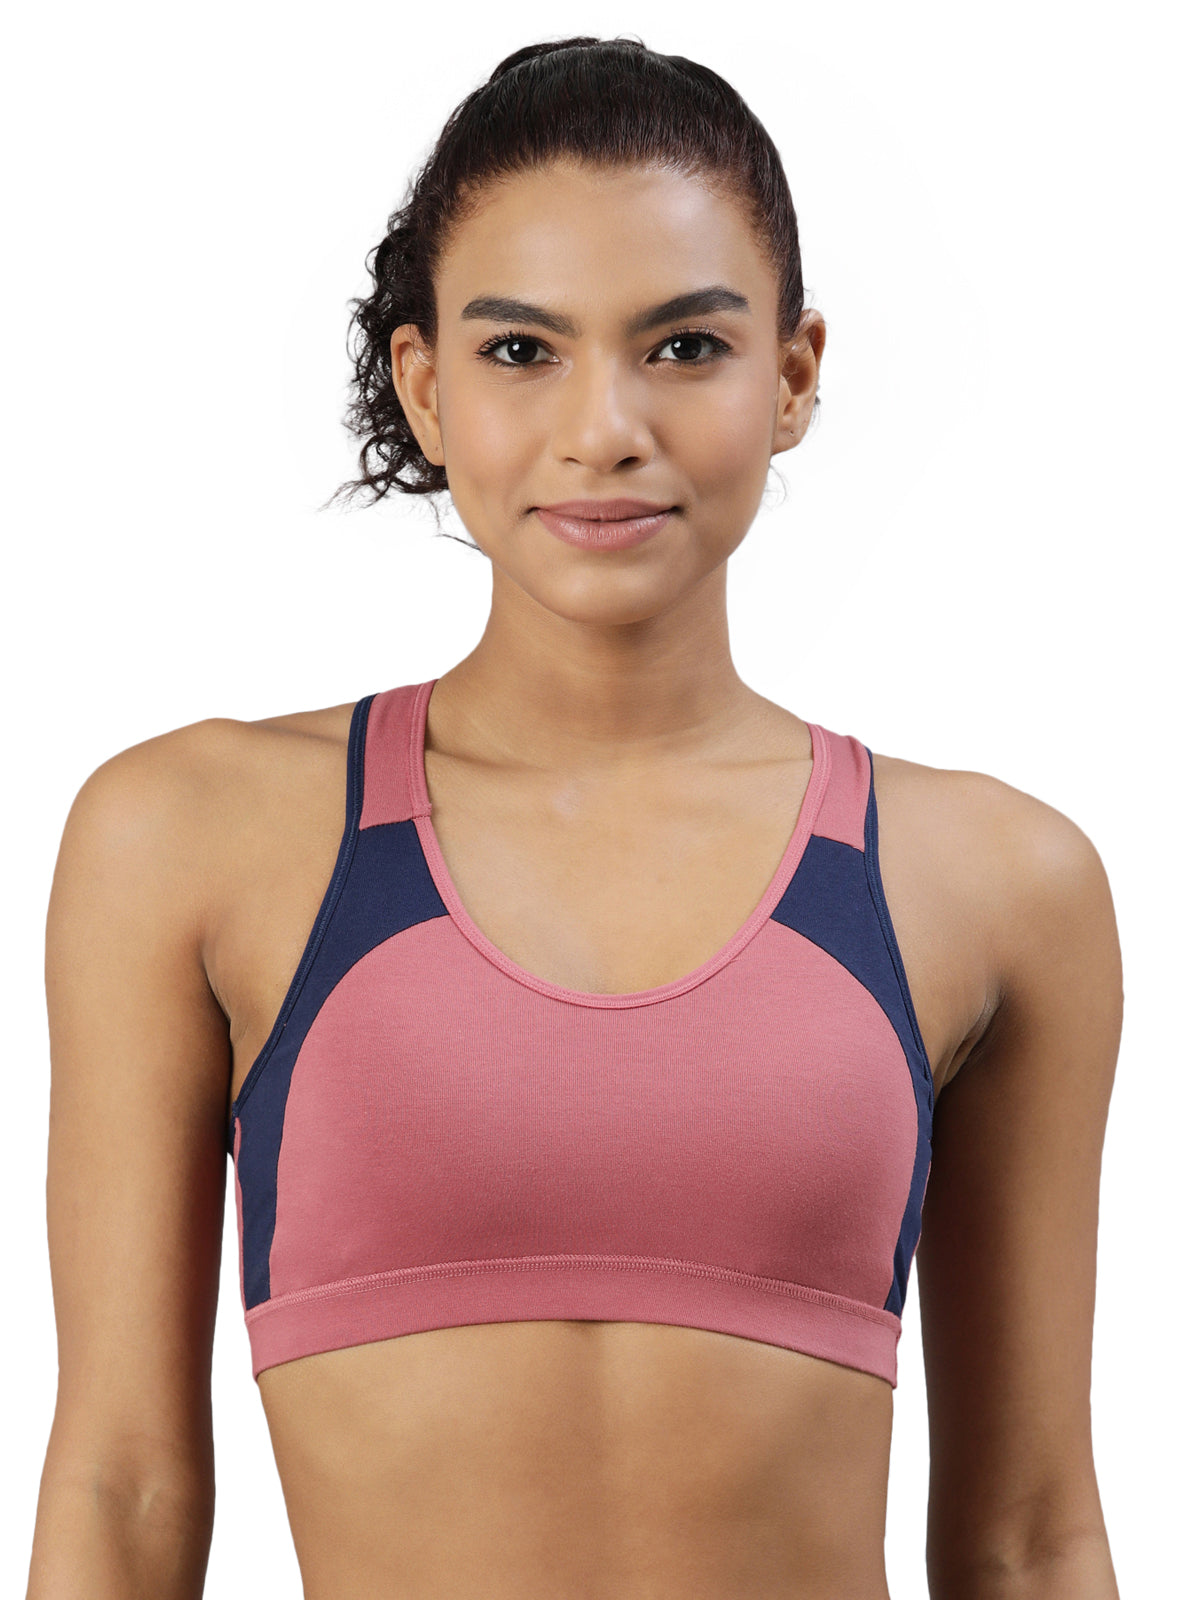 blossom-workout bra-rose gold1-Sports collection-utility based bra